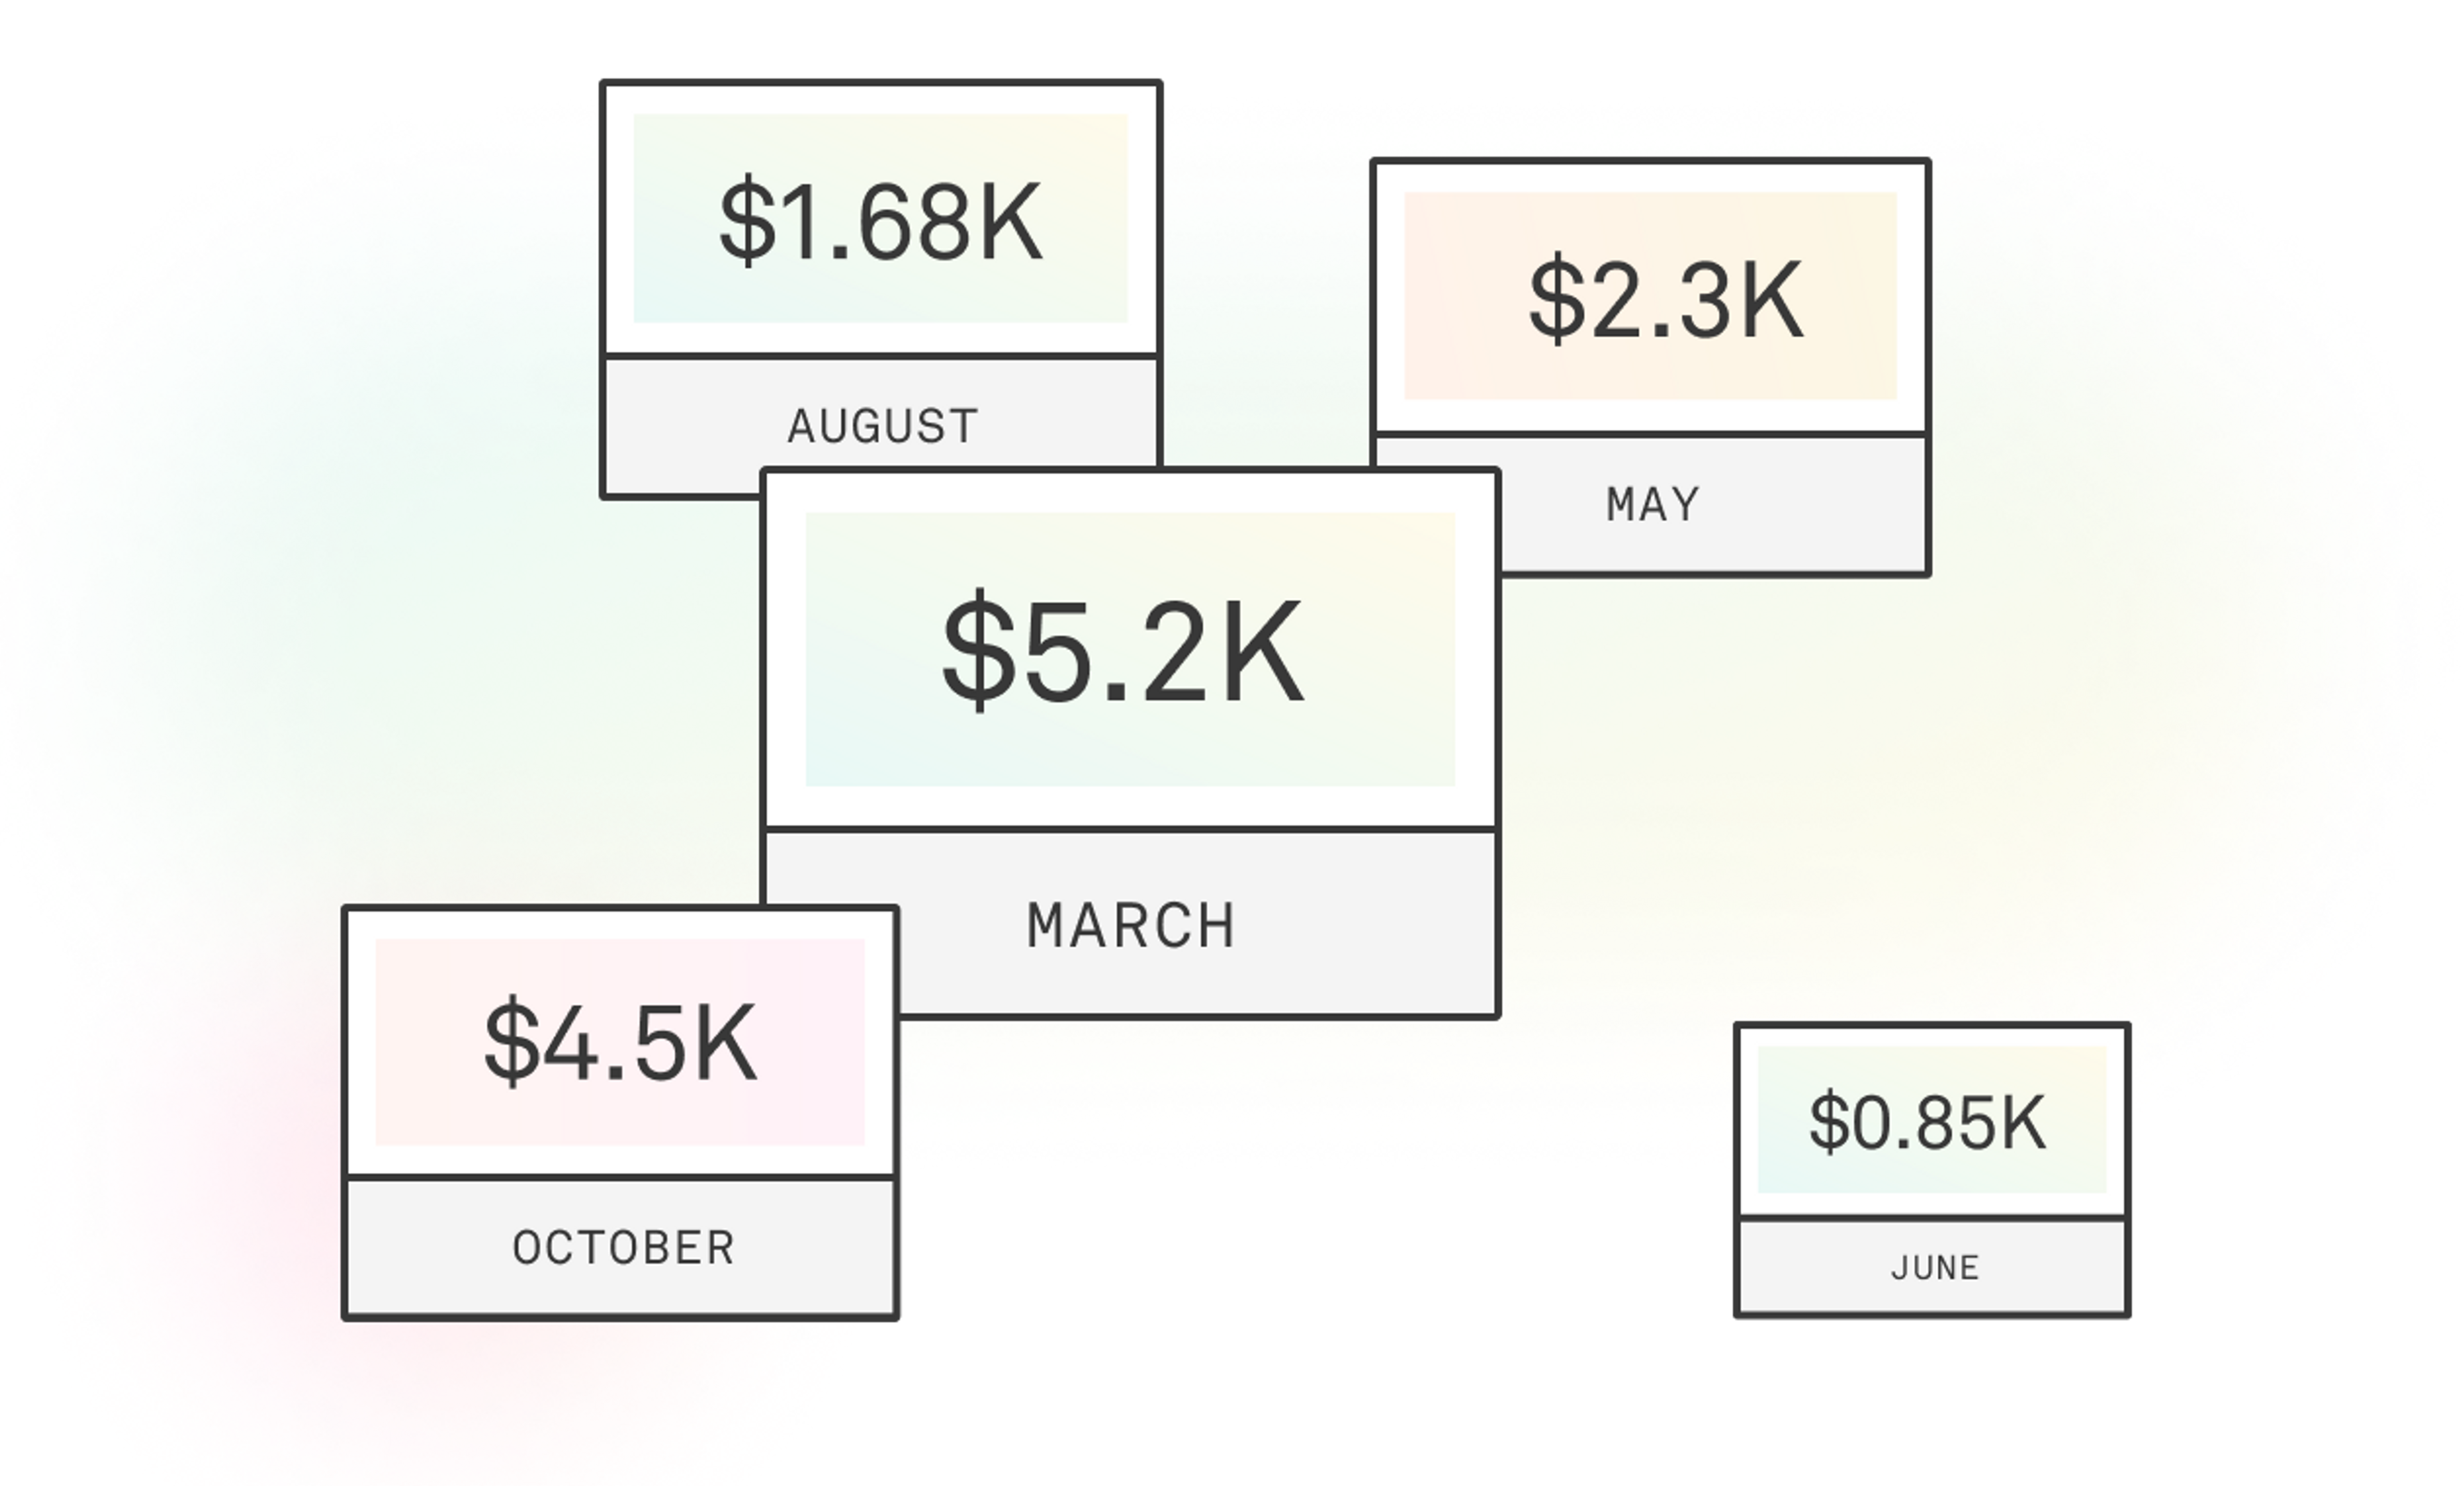 image showing different, unpredictable costs for each month